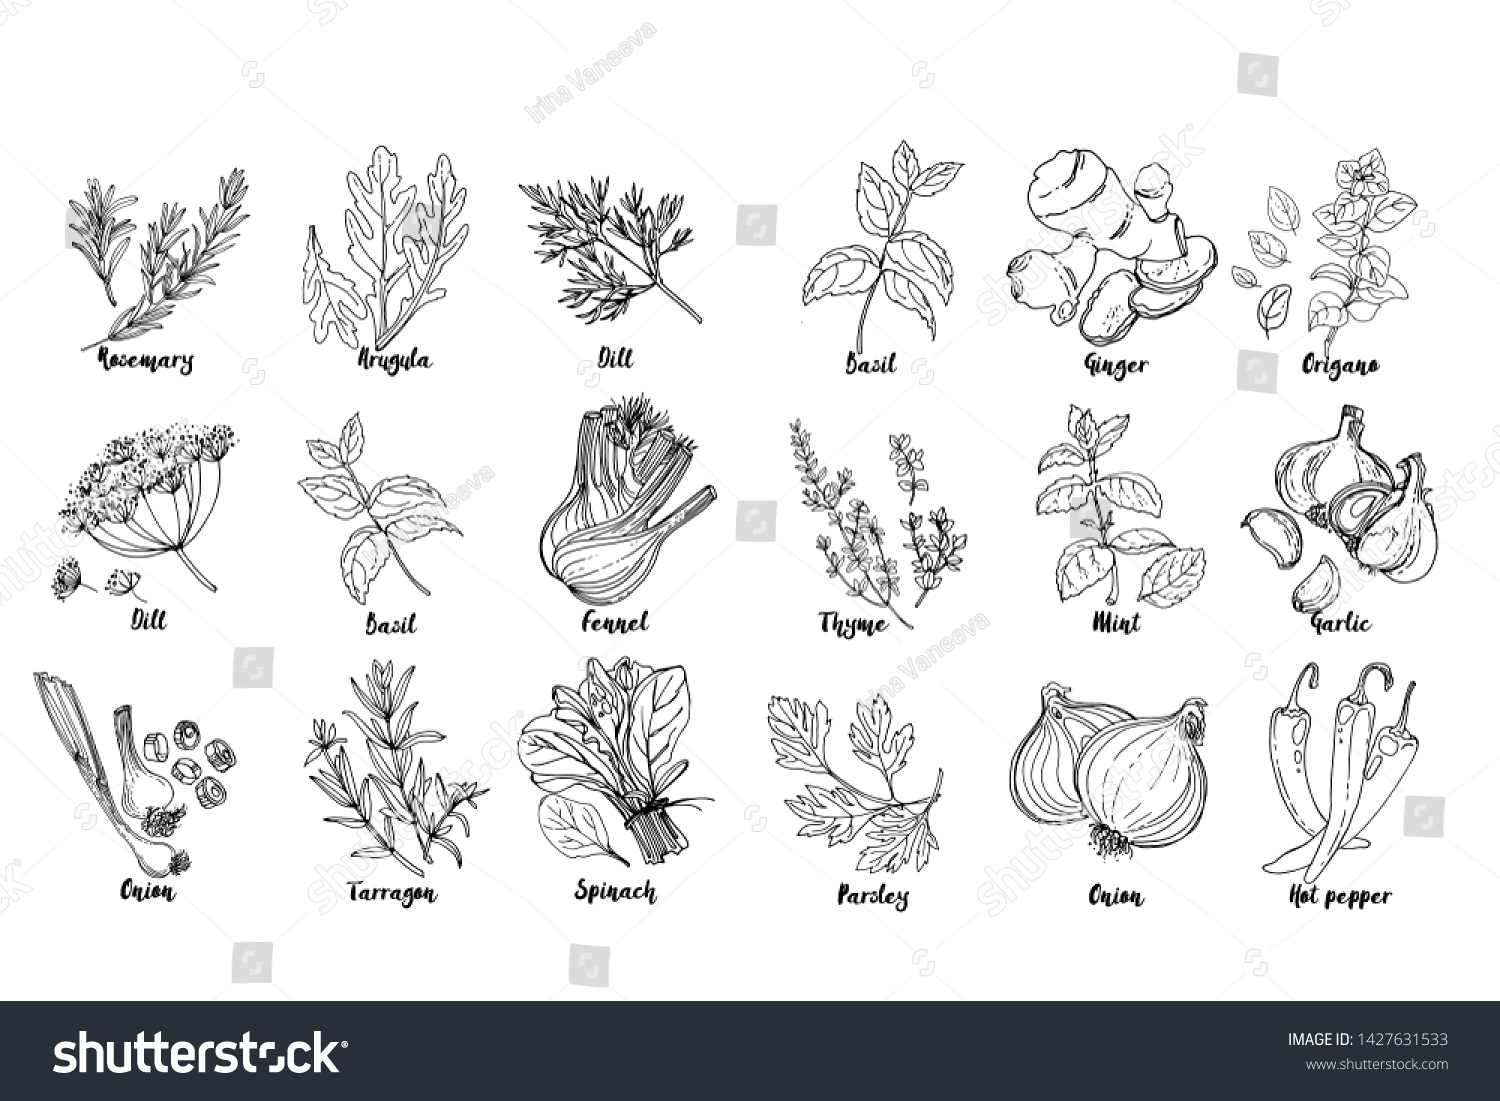 Herbs. Spices. Italian herb drawn black lines on a white background. Vector illustration. Basil, ginger, origano, Thame, mint, garlic, parsley, onion, hot pepper, rosemary, arugula, dill, basil #1427631533